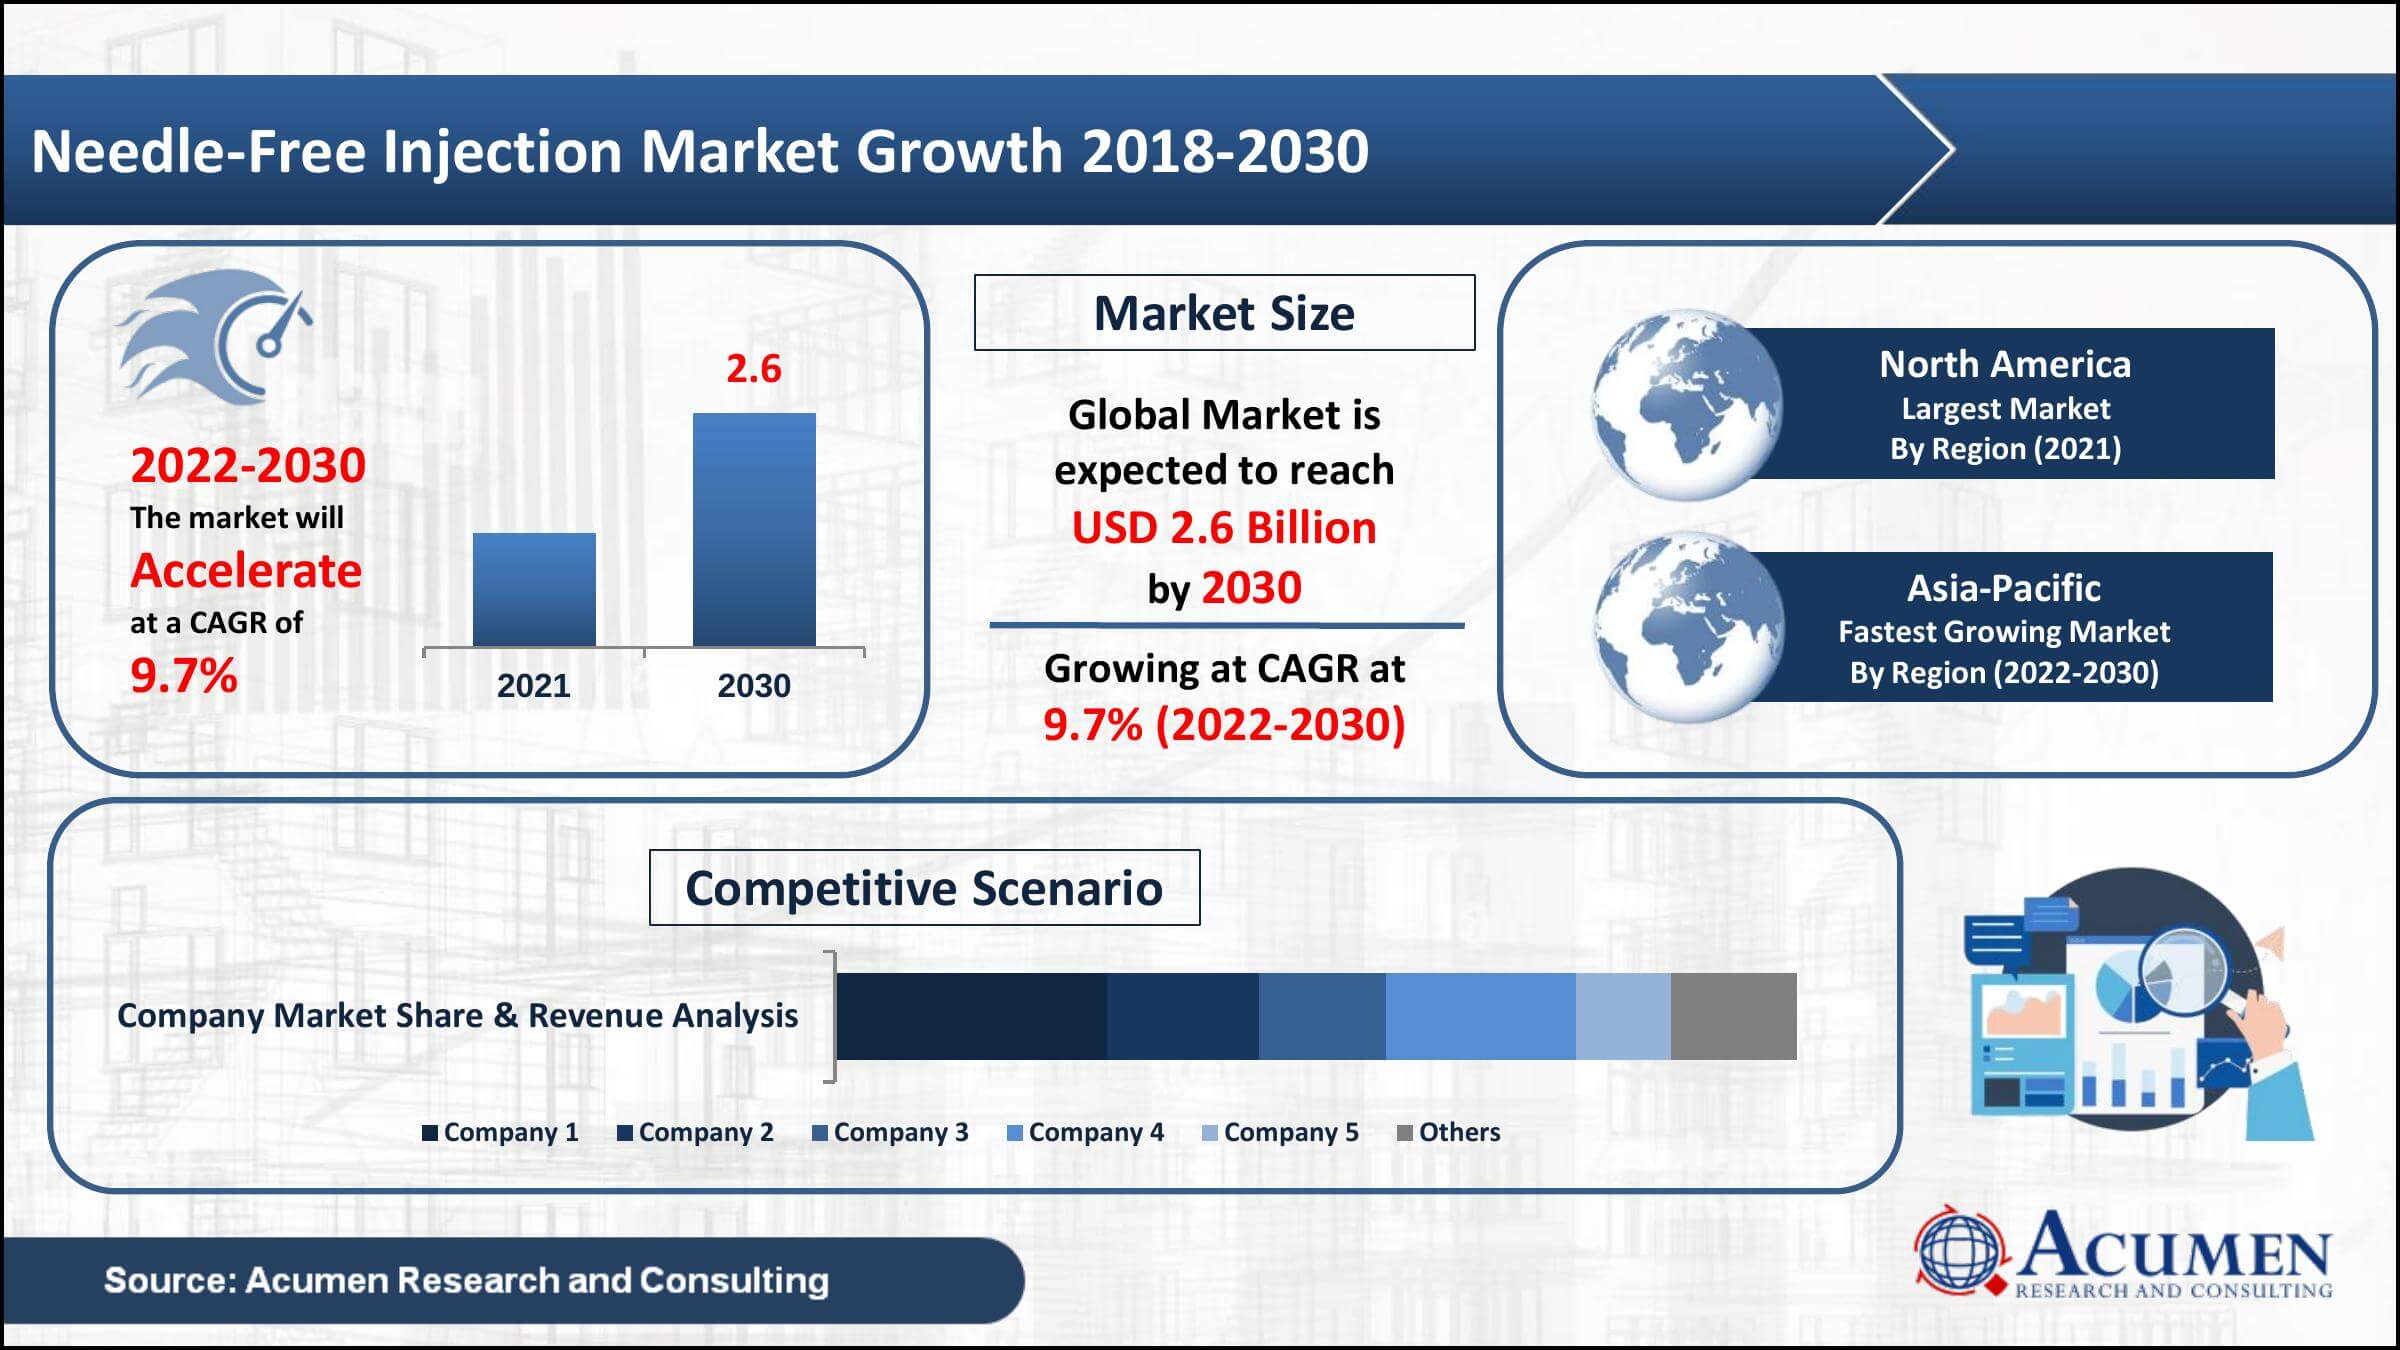 Global needle-free injection market value collected USD 1.2 Billion in 2021, with a 9.7% CAGR between 2022 and 2030